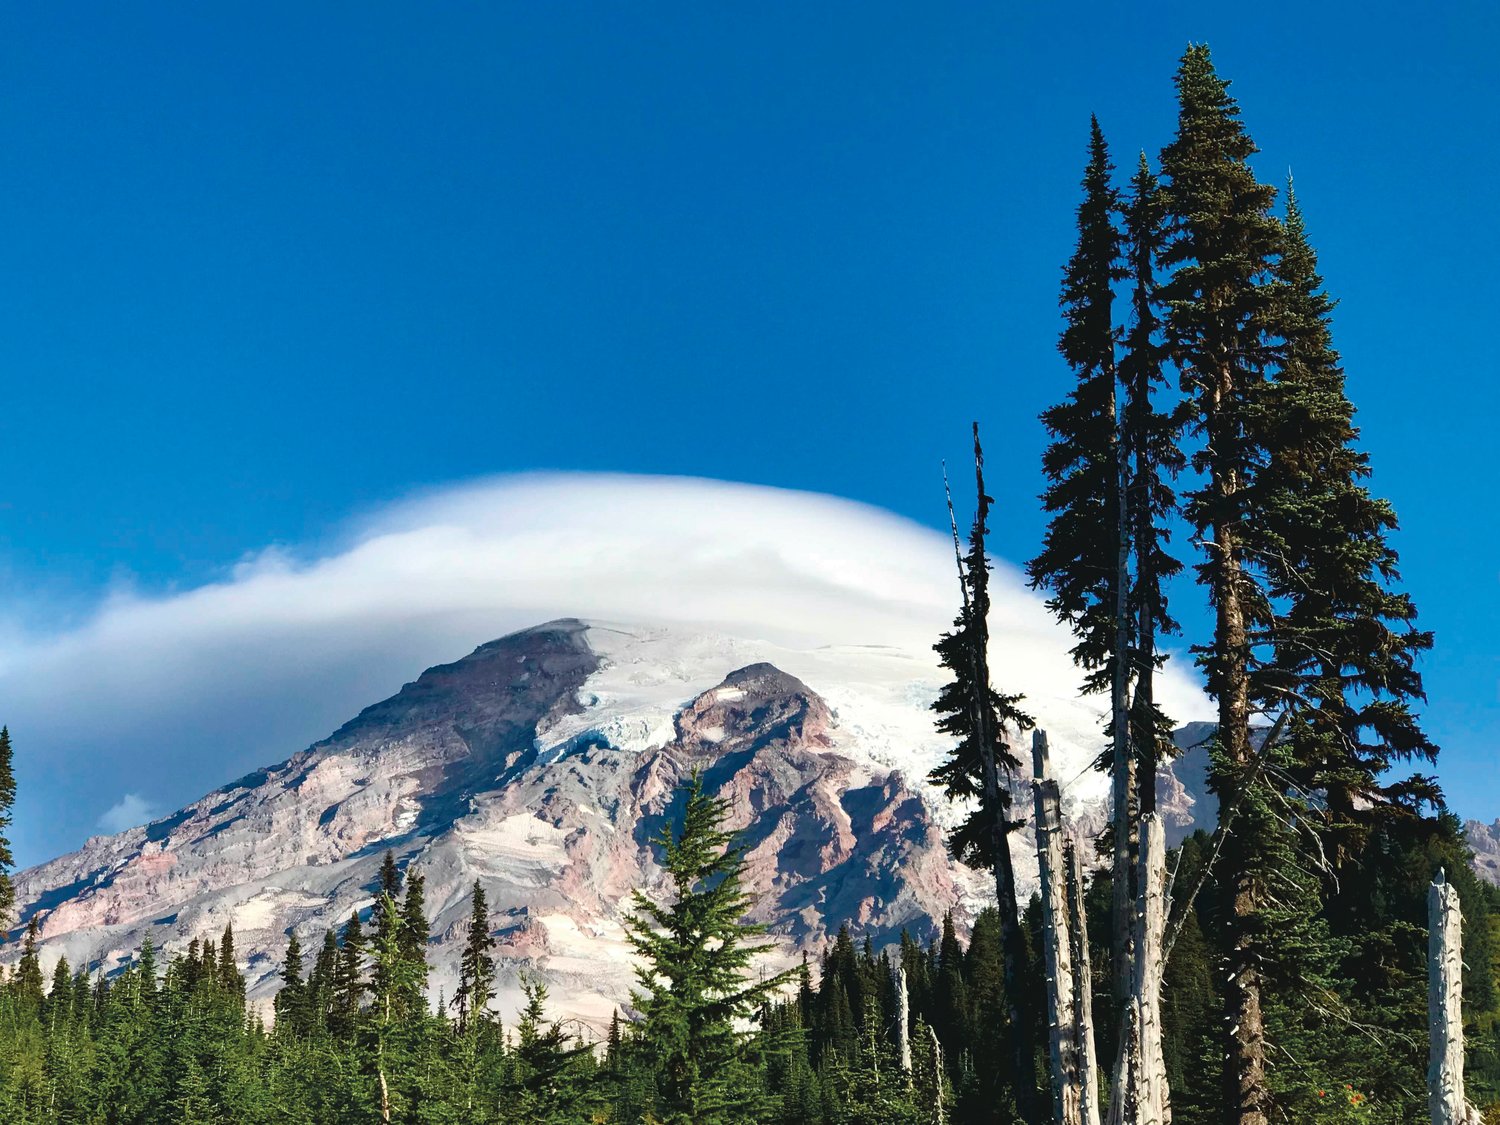 Clouds form over Mount Rainier in this photograph taken from the Golden Gate Trail at Paradise in Mount Rainier National Parl last weekend.